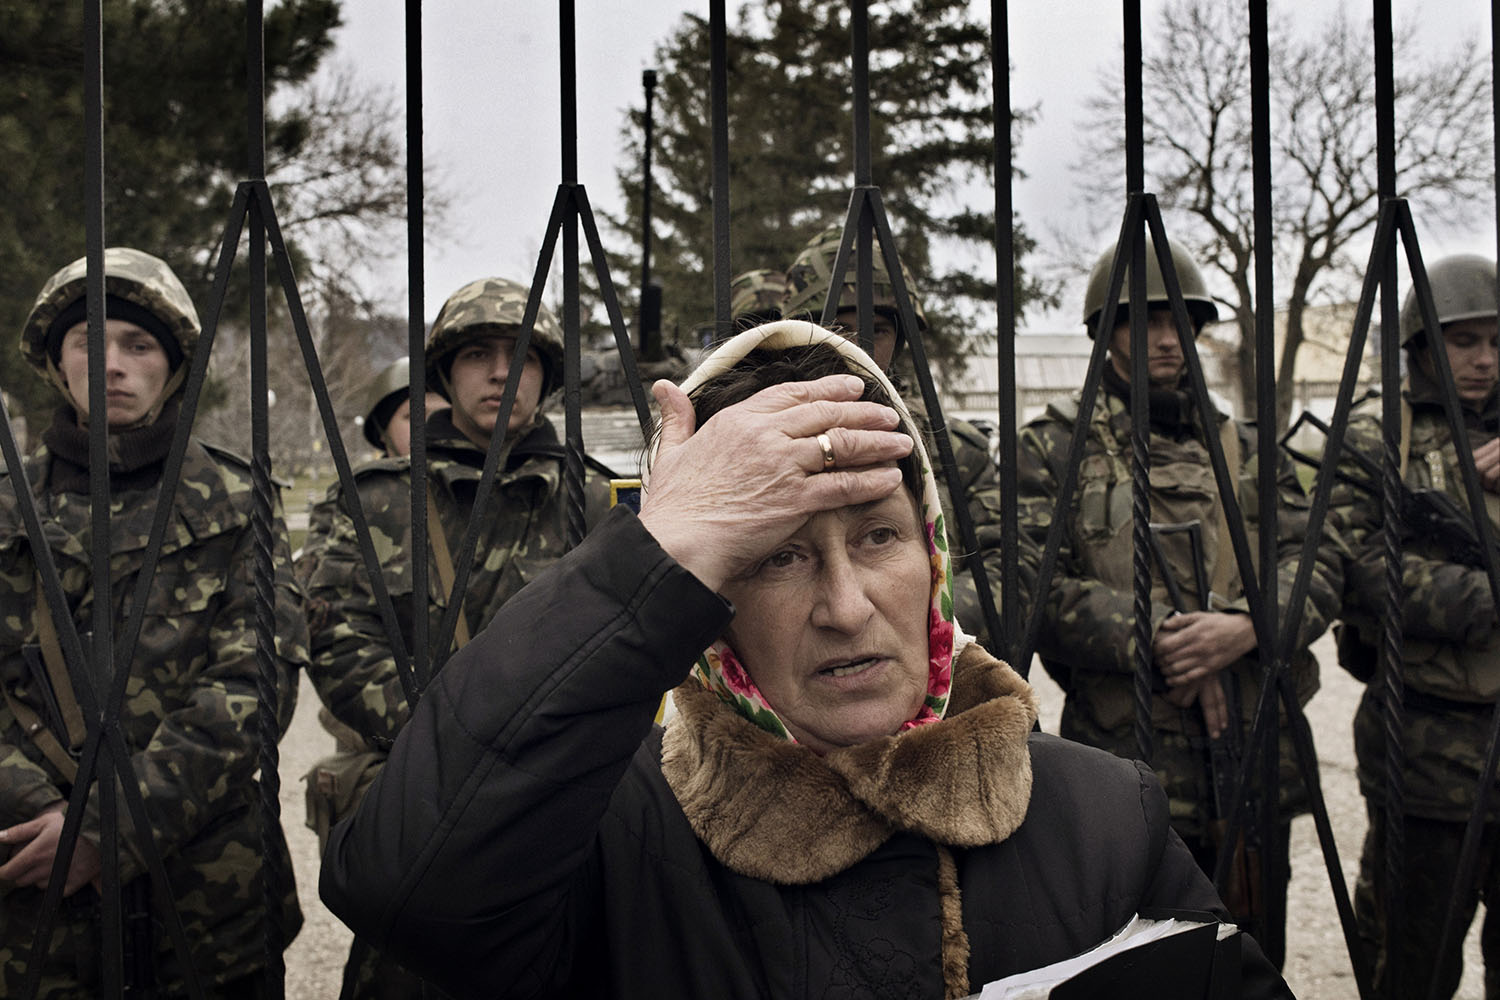 SIMFEROPOL, Ukraine March  2, 2014. Ukrainian  woman  reacts   as  troops  in   unmarked  uniforms   keep up   position  around the  base.